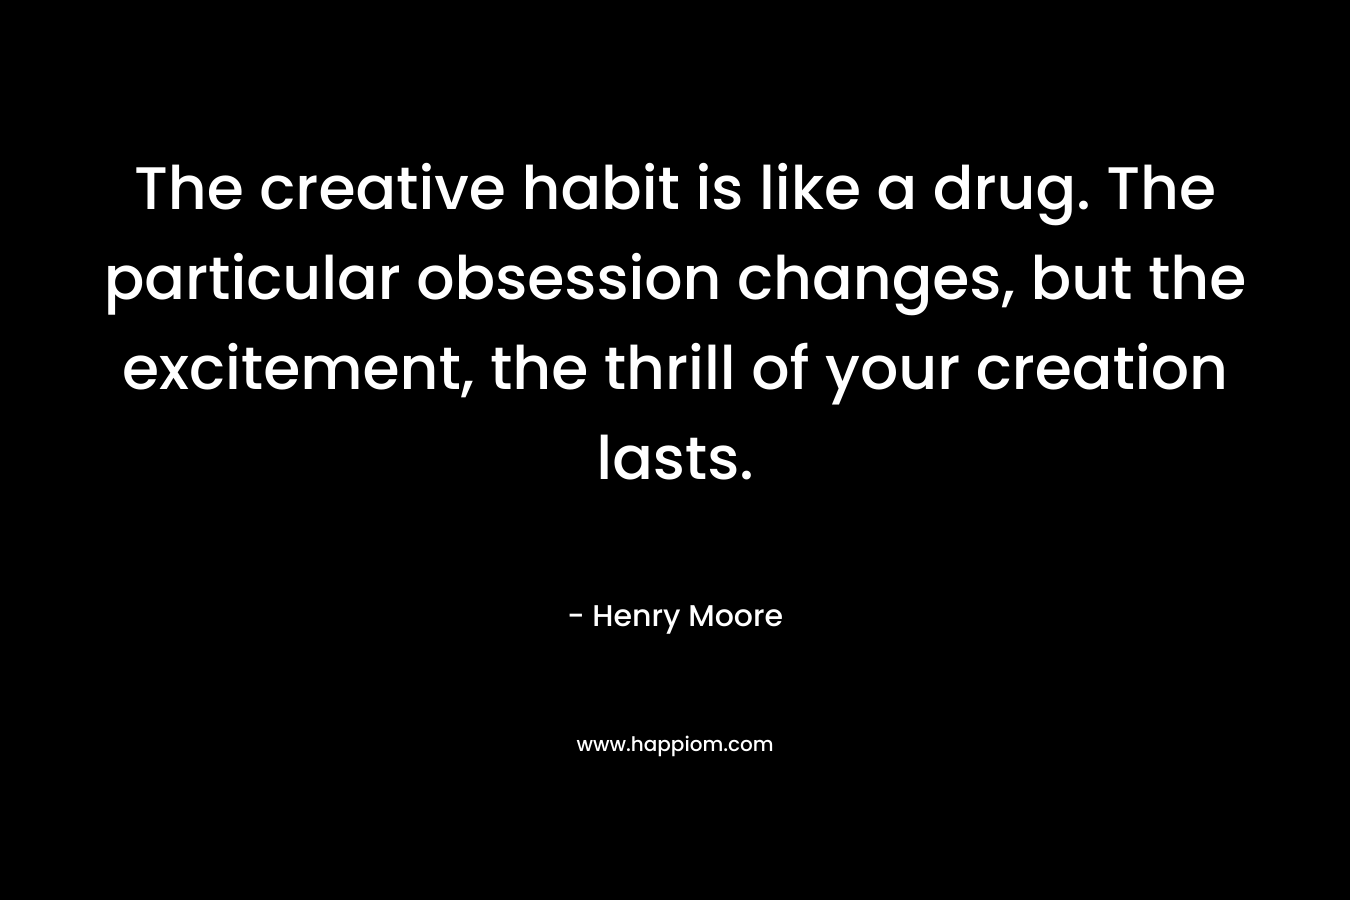 The creative habit is like a drug. The particular obsession changes, but the excitement, the thrill of your creation lasts.